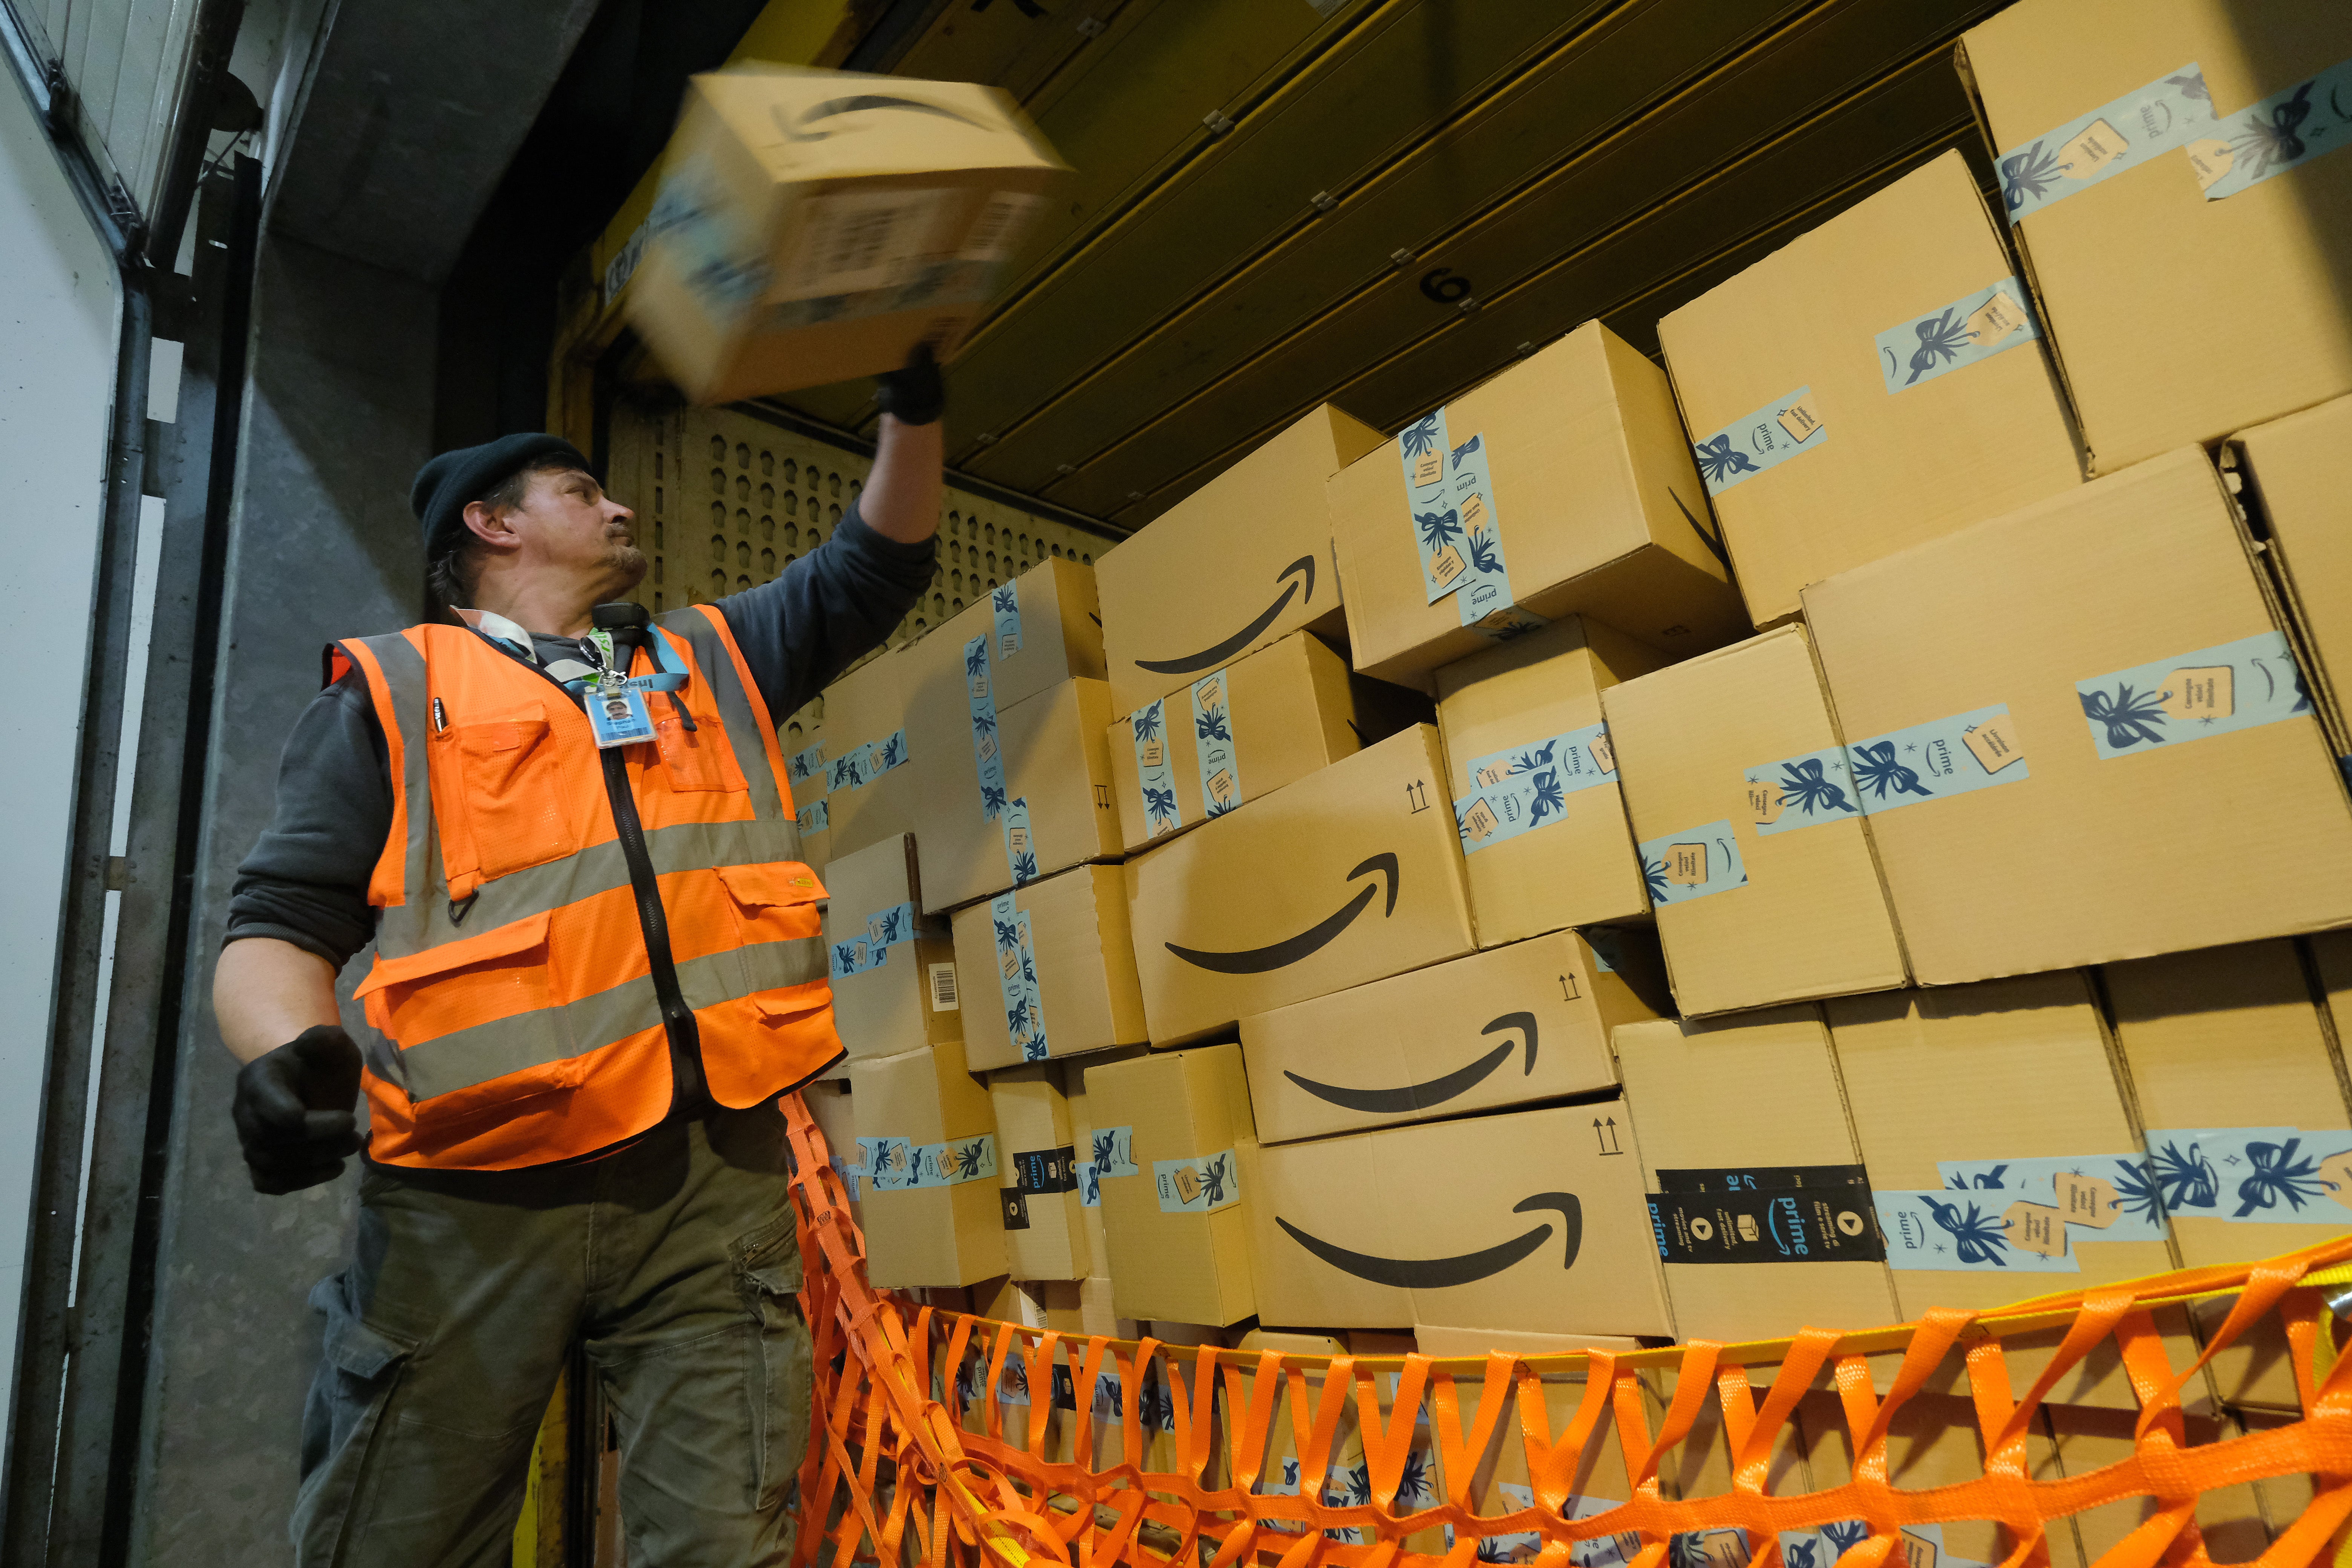 A worker loads a truck with packages at an Amazon packaging center on November 28, 2019 in Brieselang, Germany. (Photo by Sean Gallup/Getty Images)